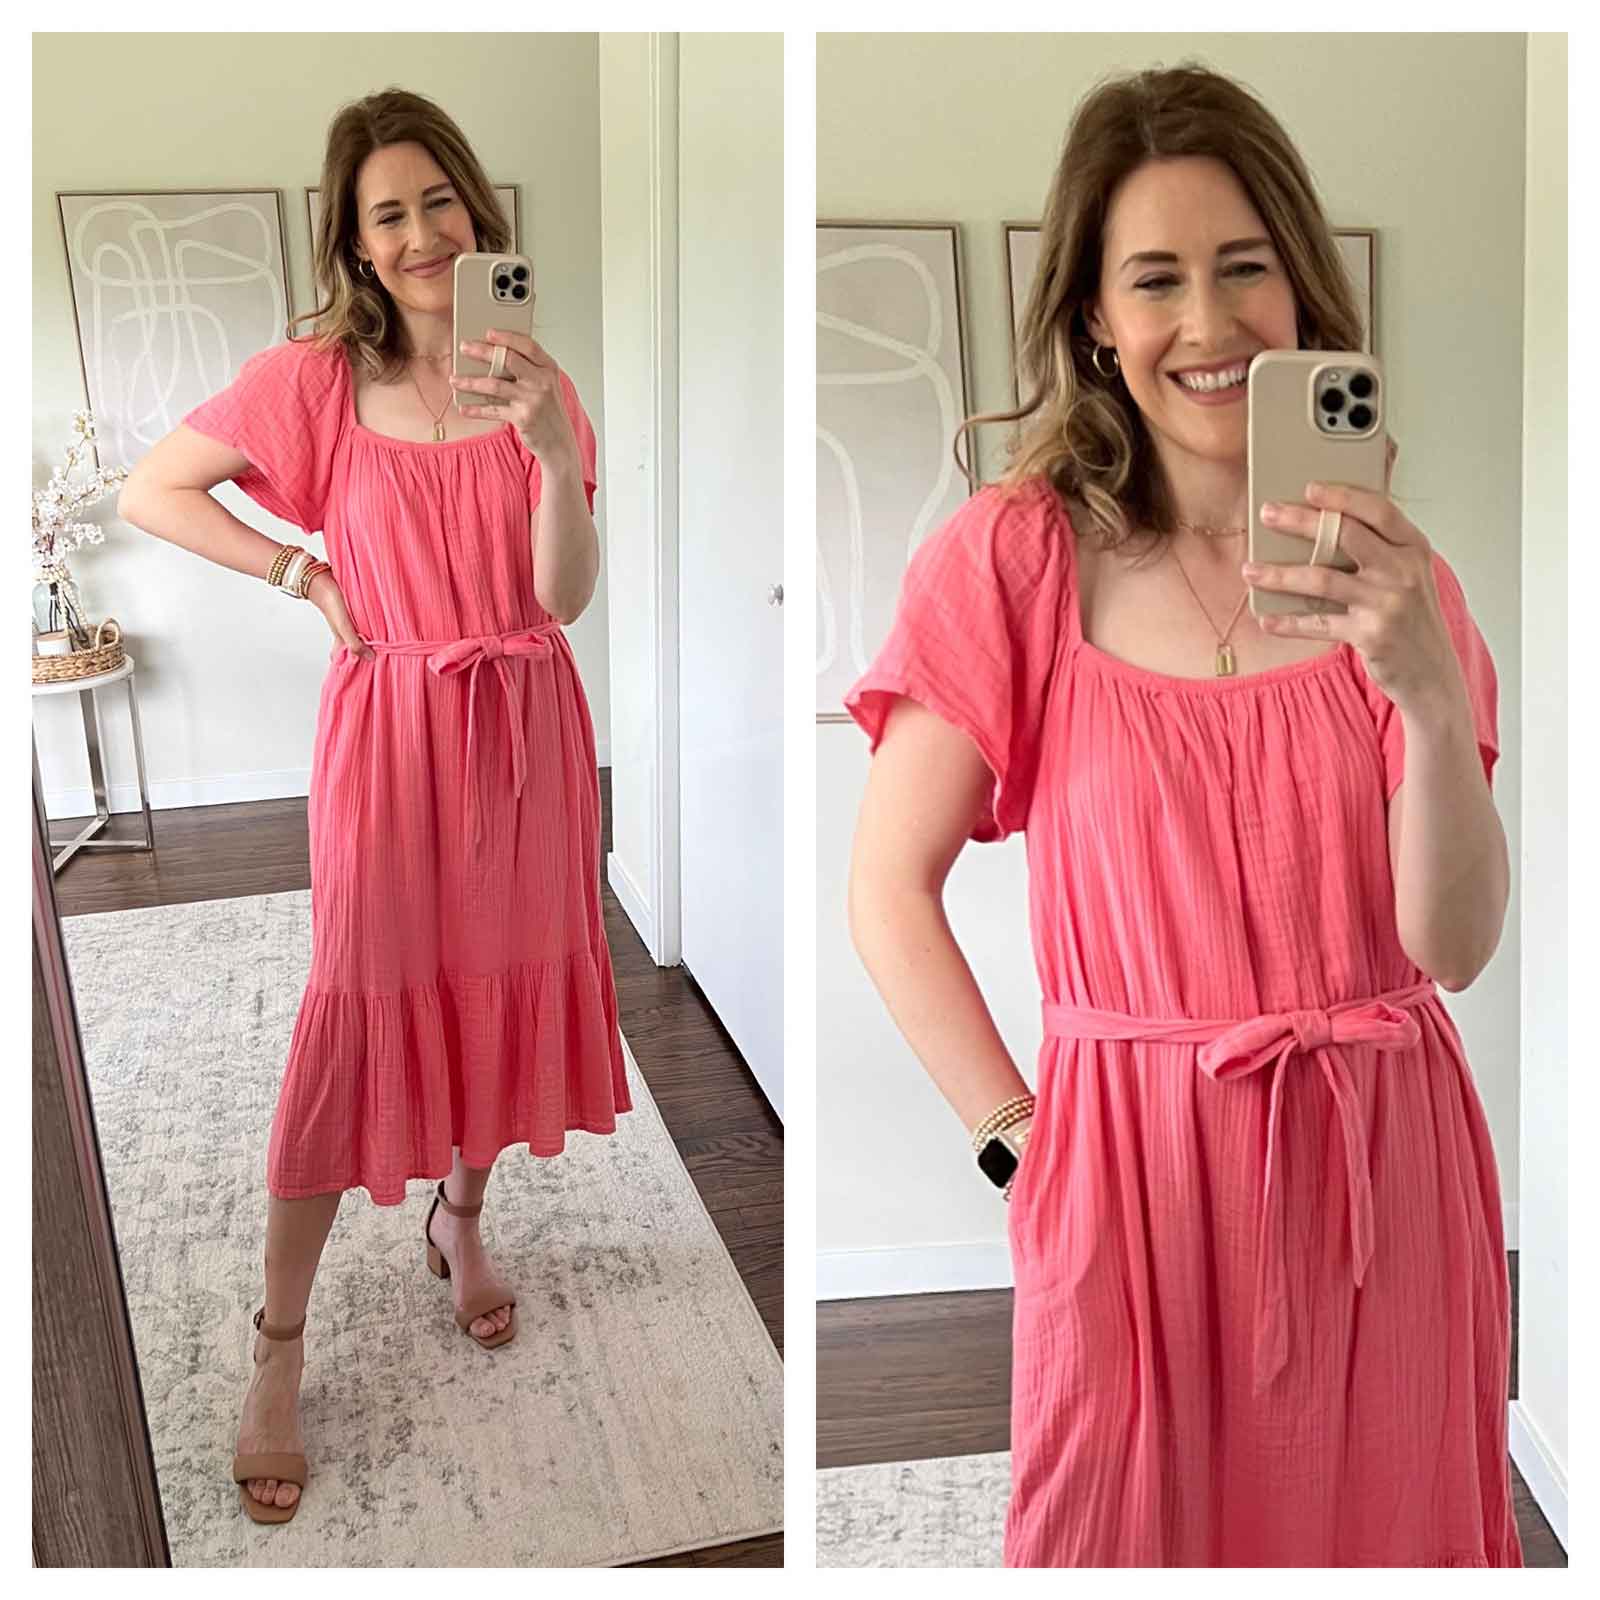 Walmart fashion finds in coral pink!